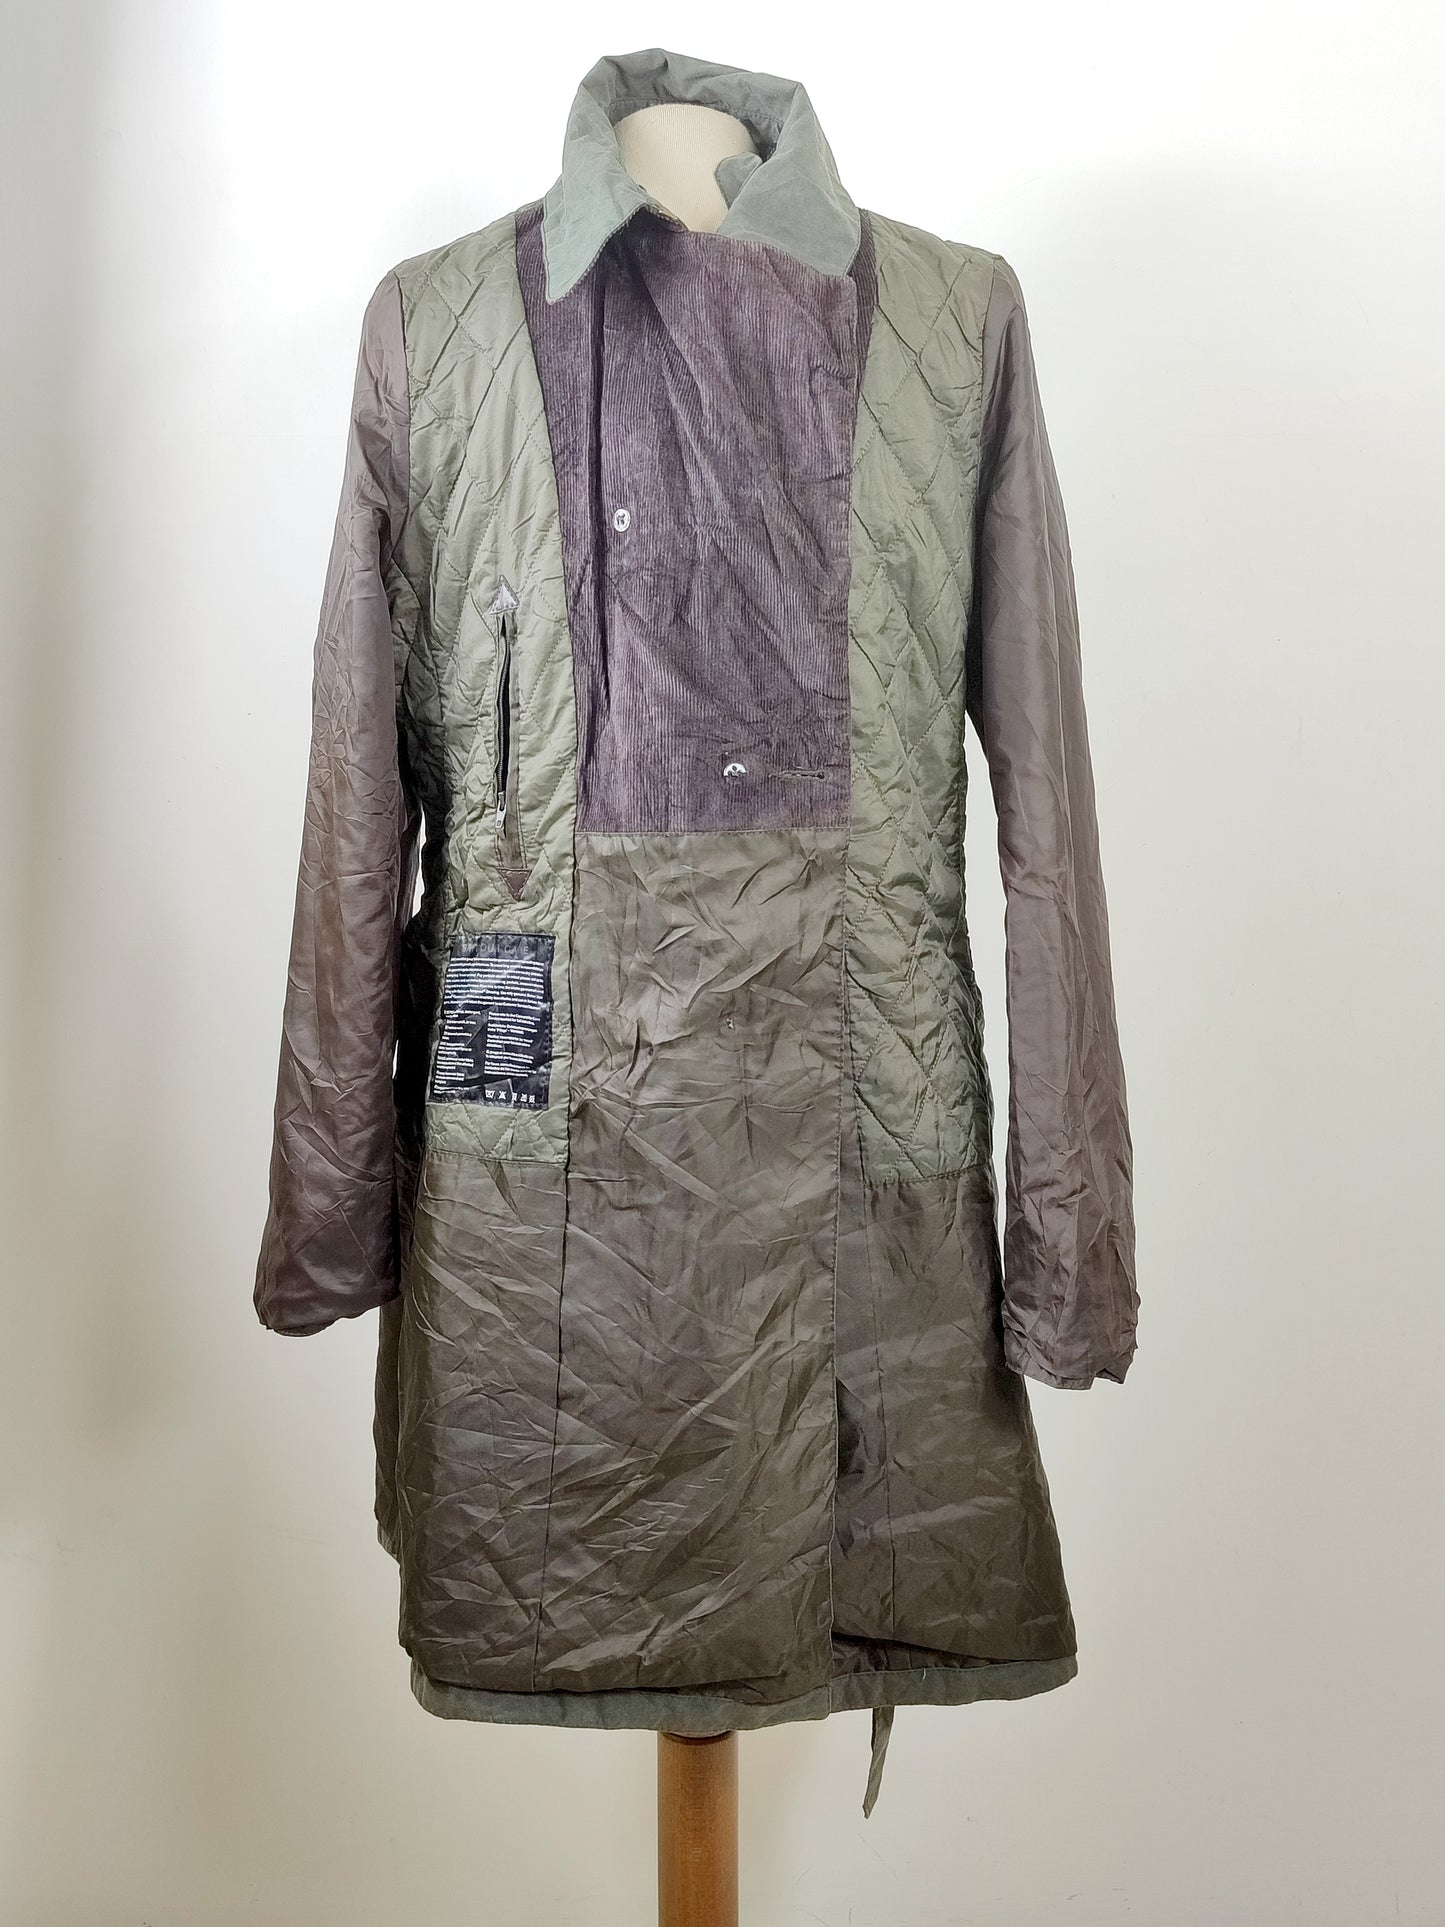 Trench Barbour da donna verde cerato uk14 tg44 -Lady Vintage Wax Trench green Uk14 Medium